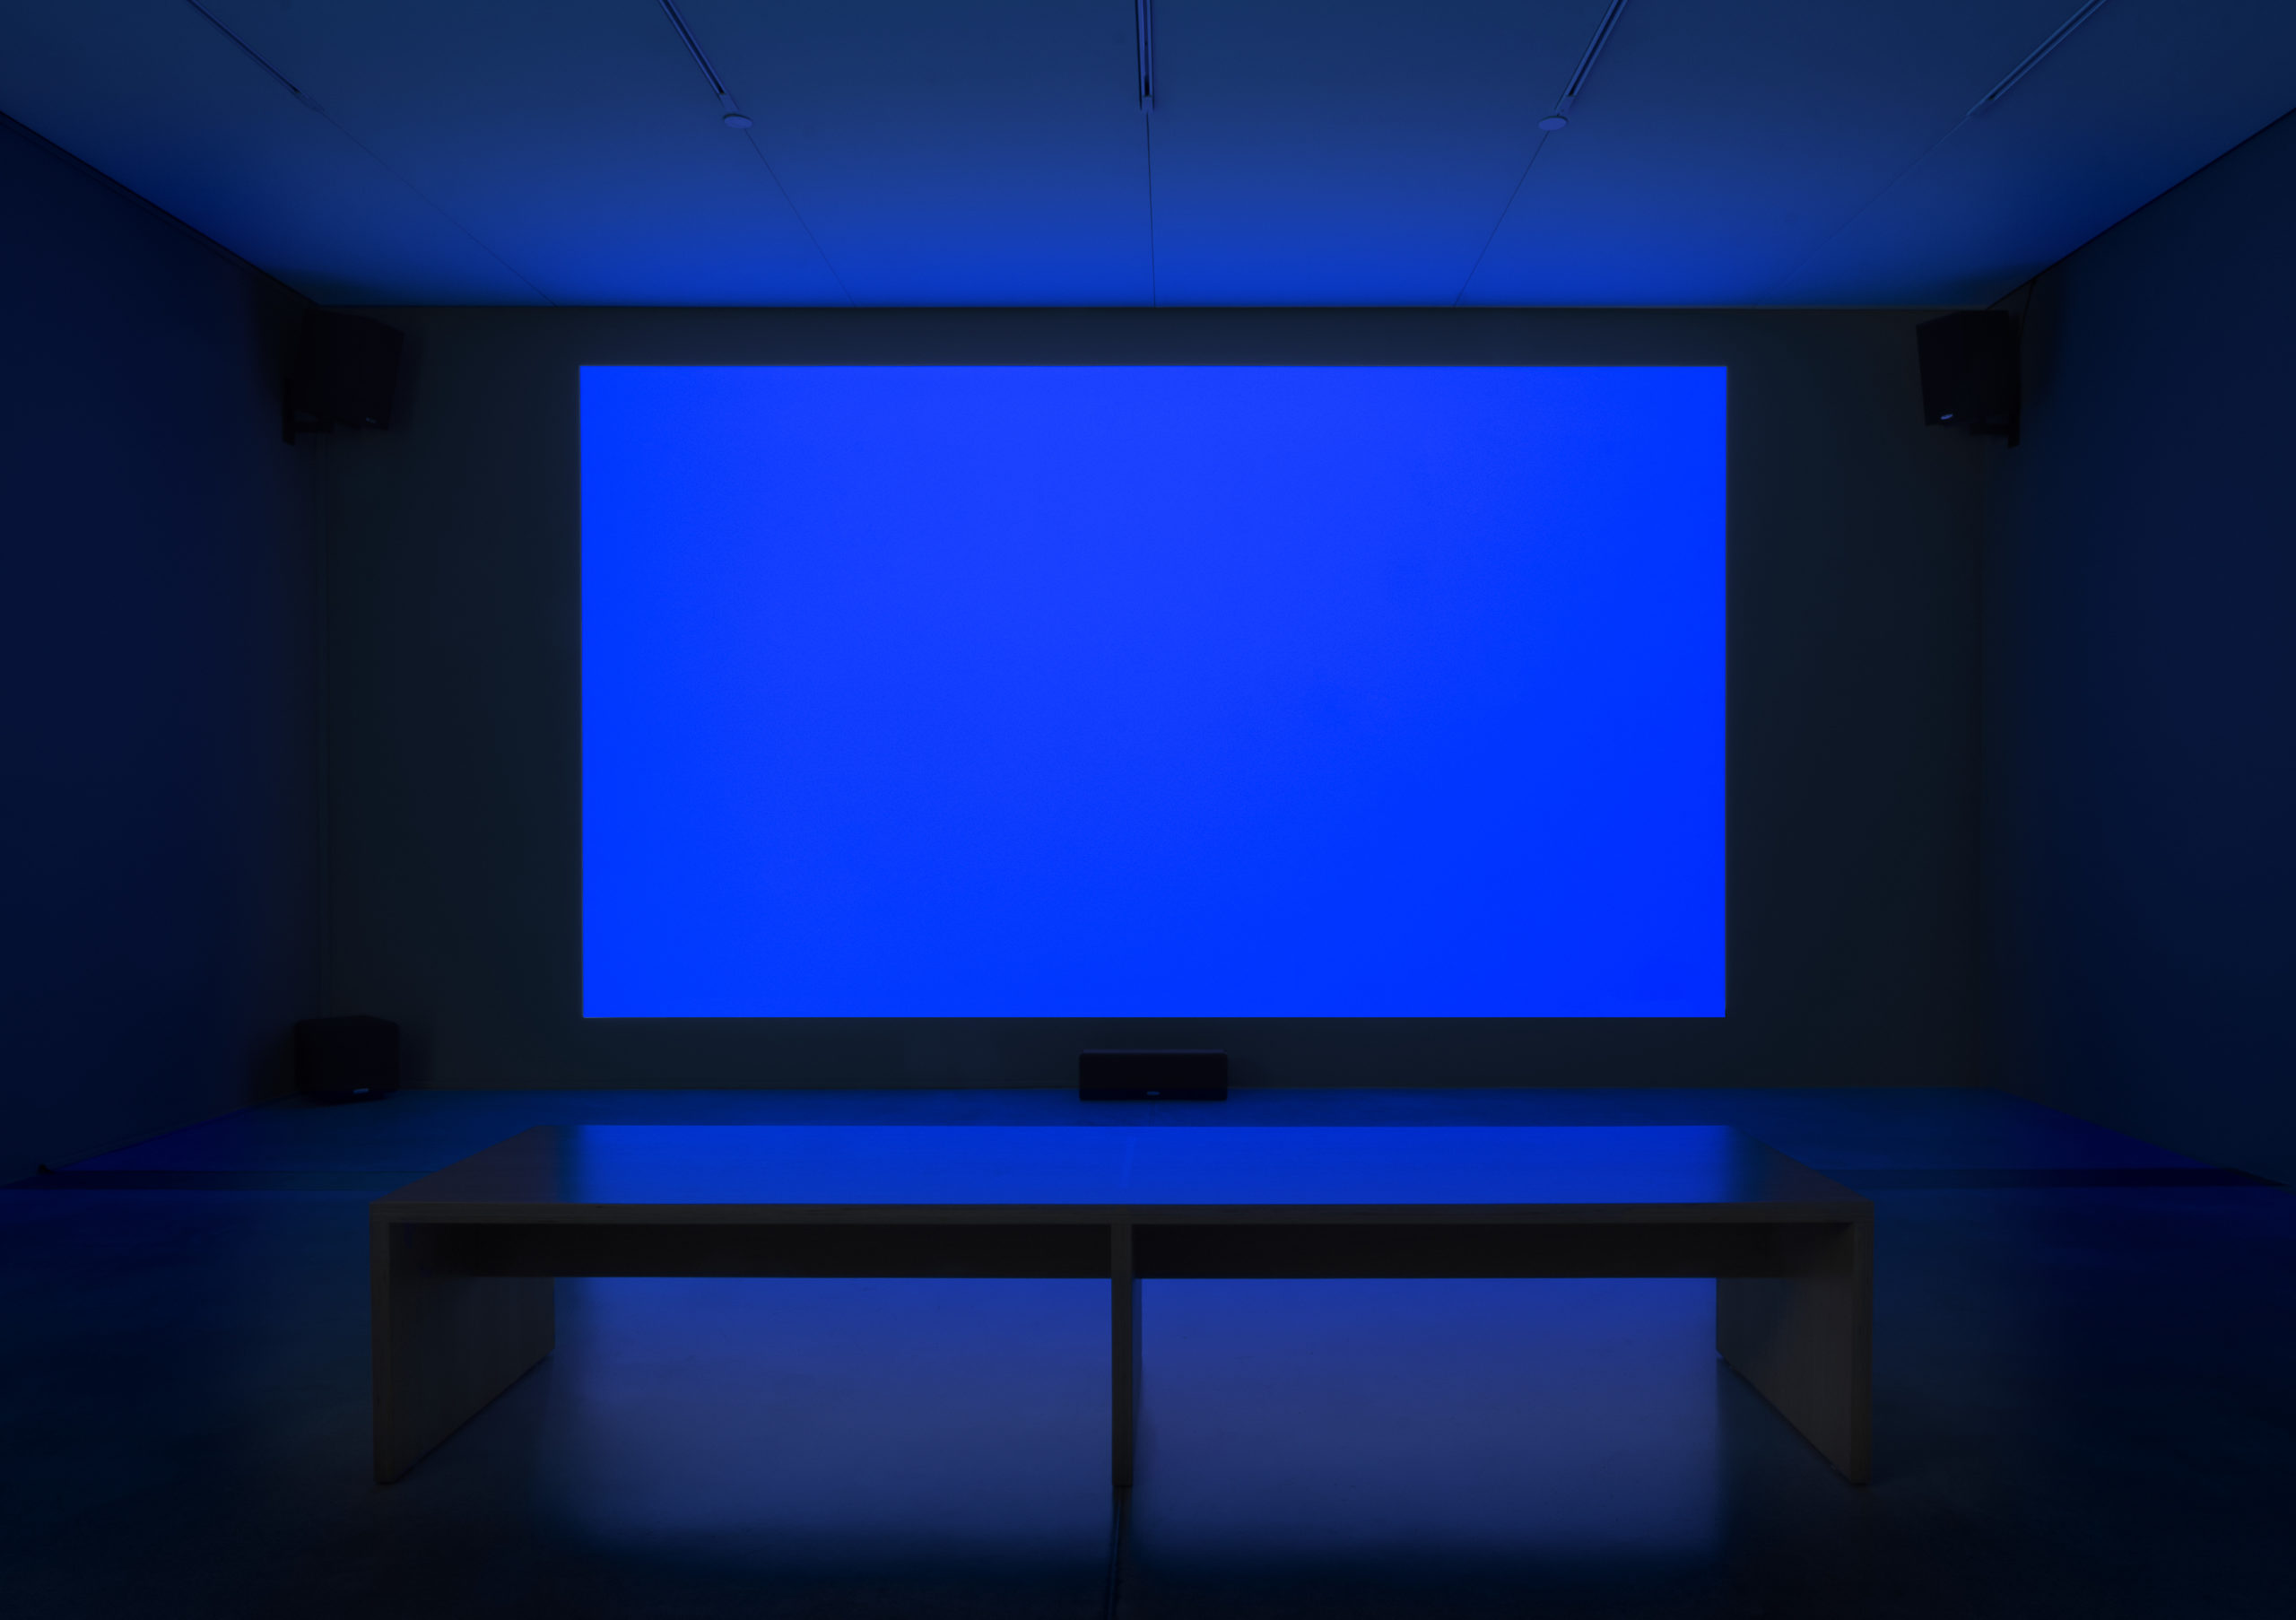 A dark room with a vibrant blue panel that reflects onto the ground.